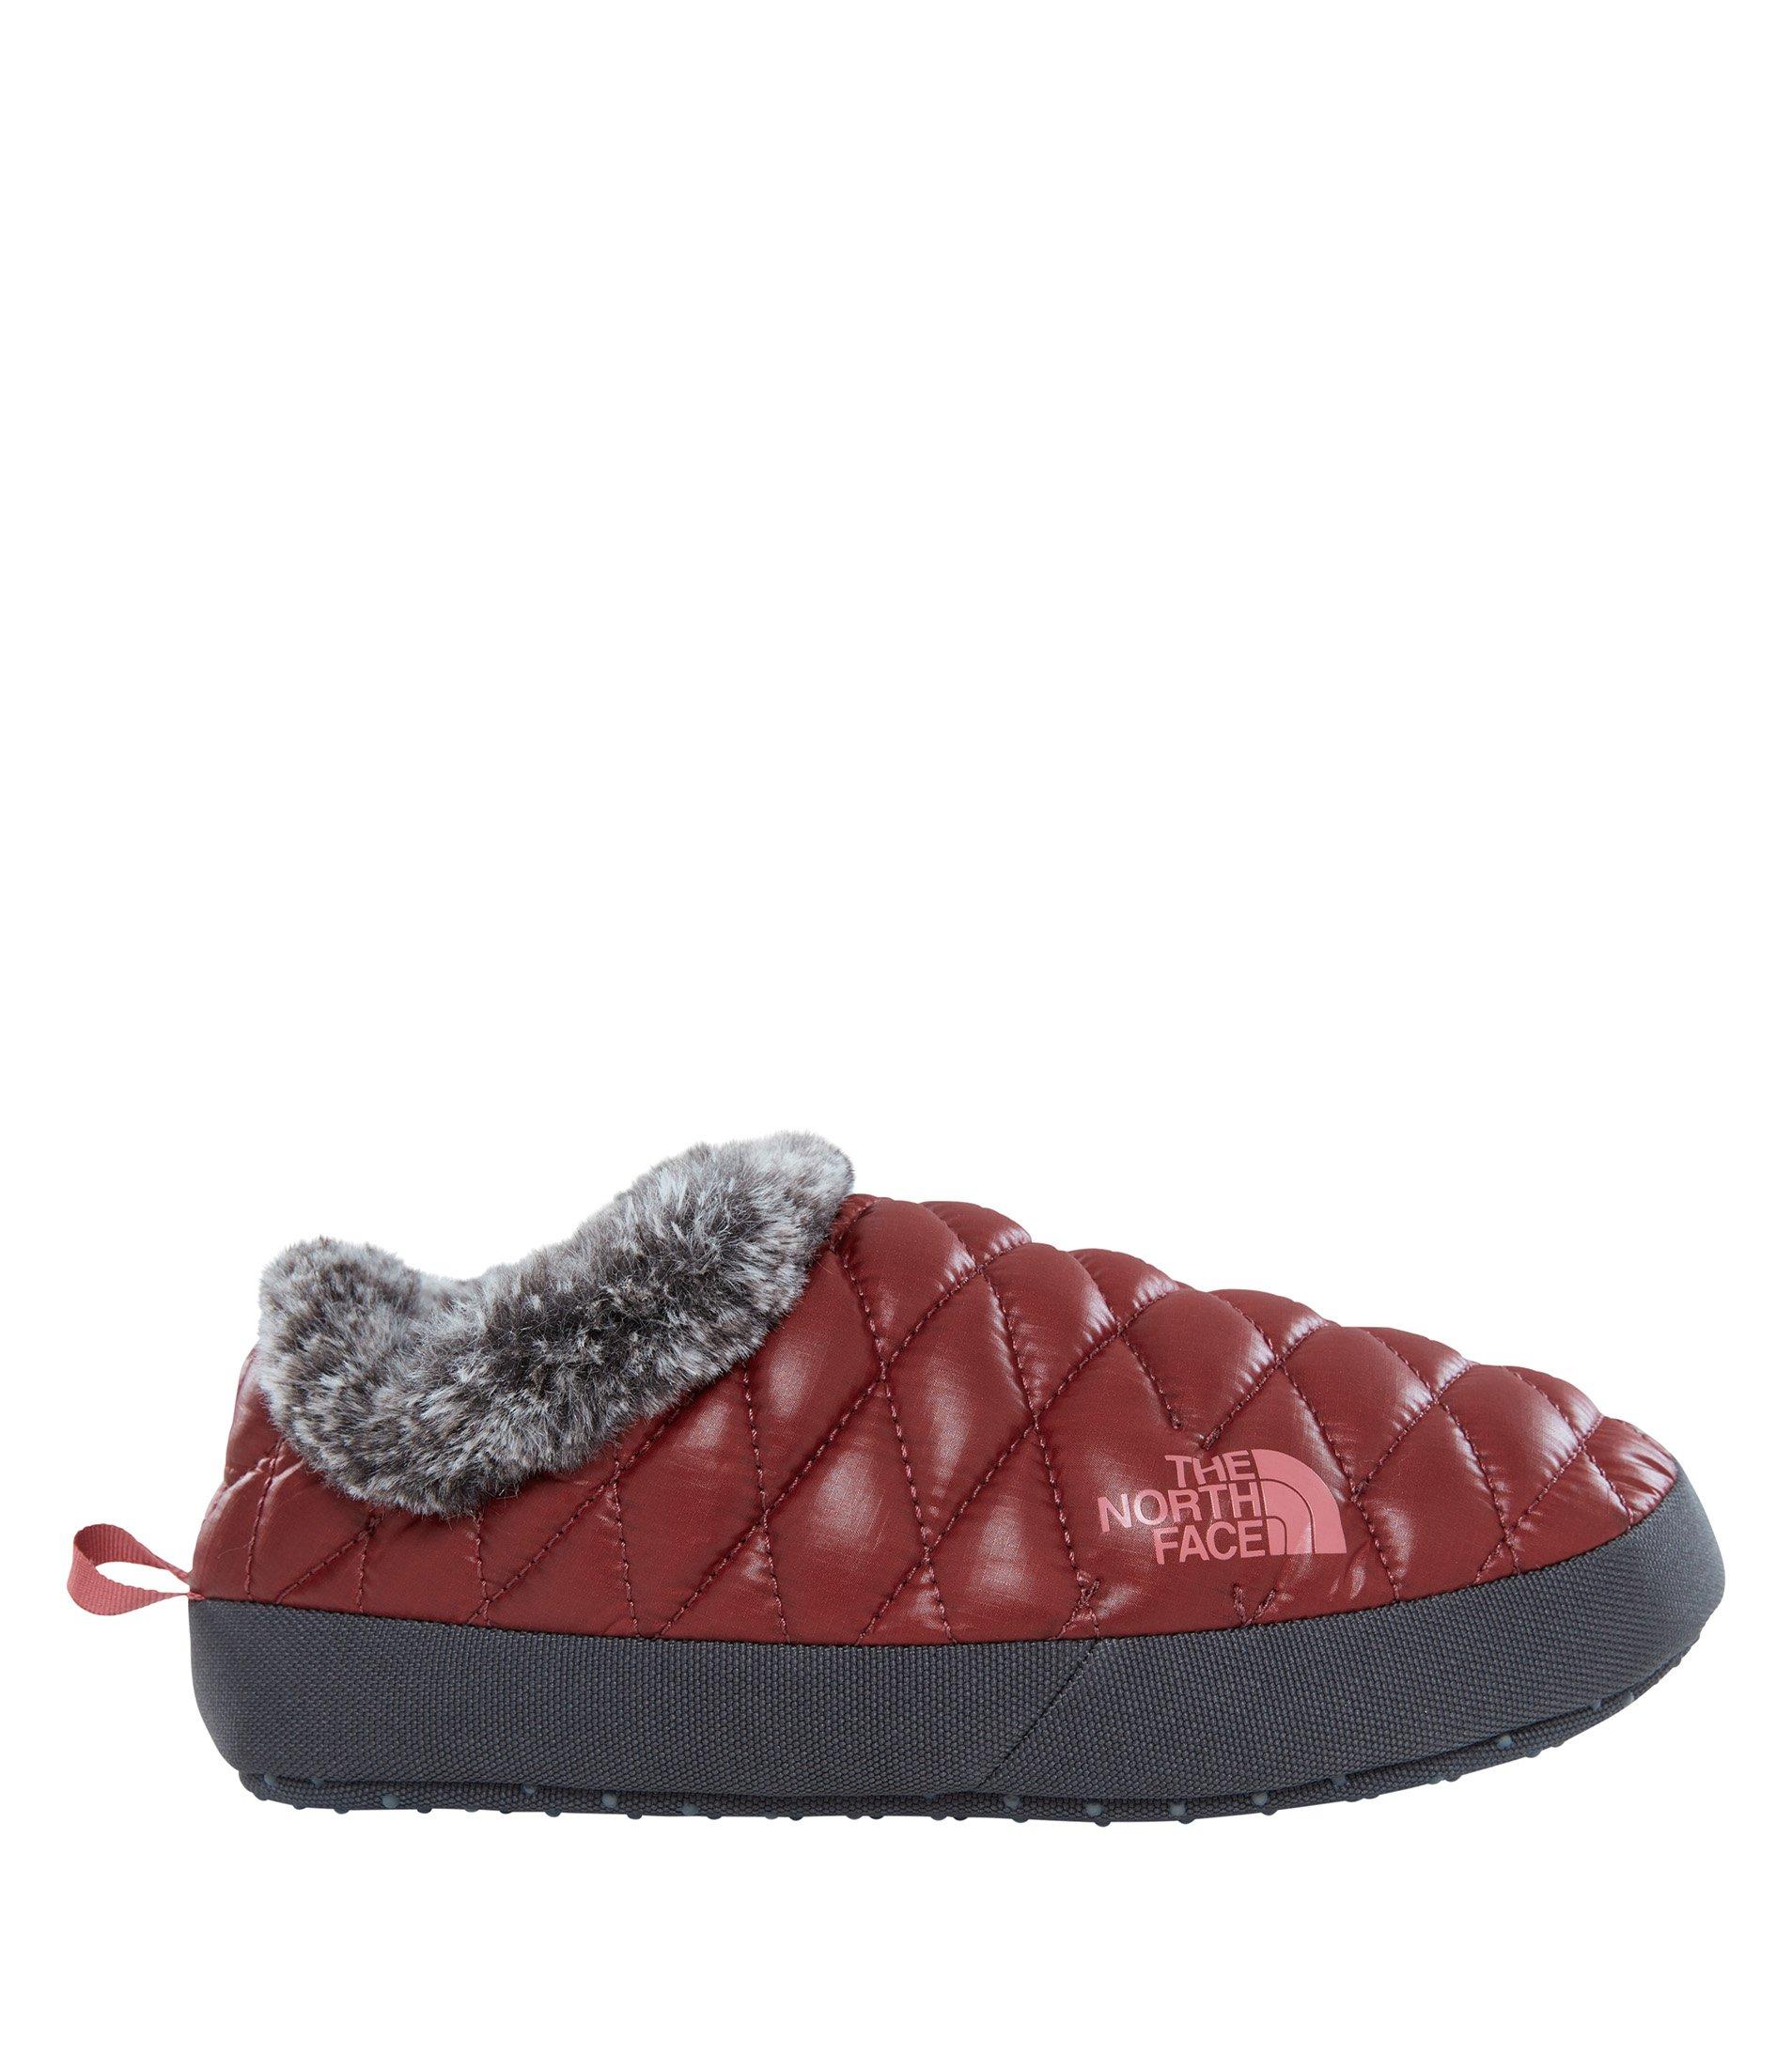 Women's The North Face Thermoball? Fur Trim Slipper | Slippers and Tent ...